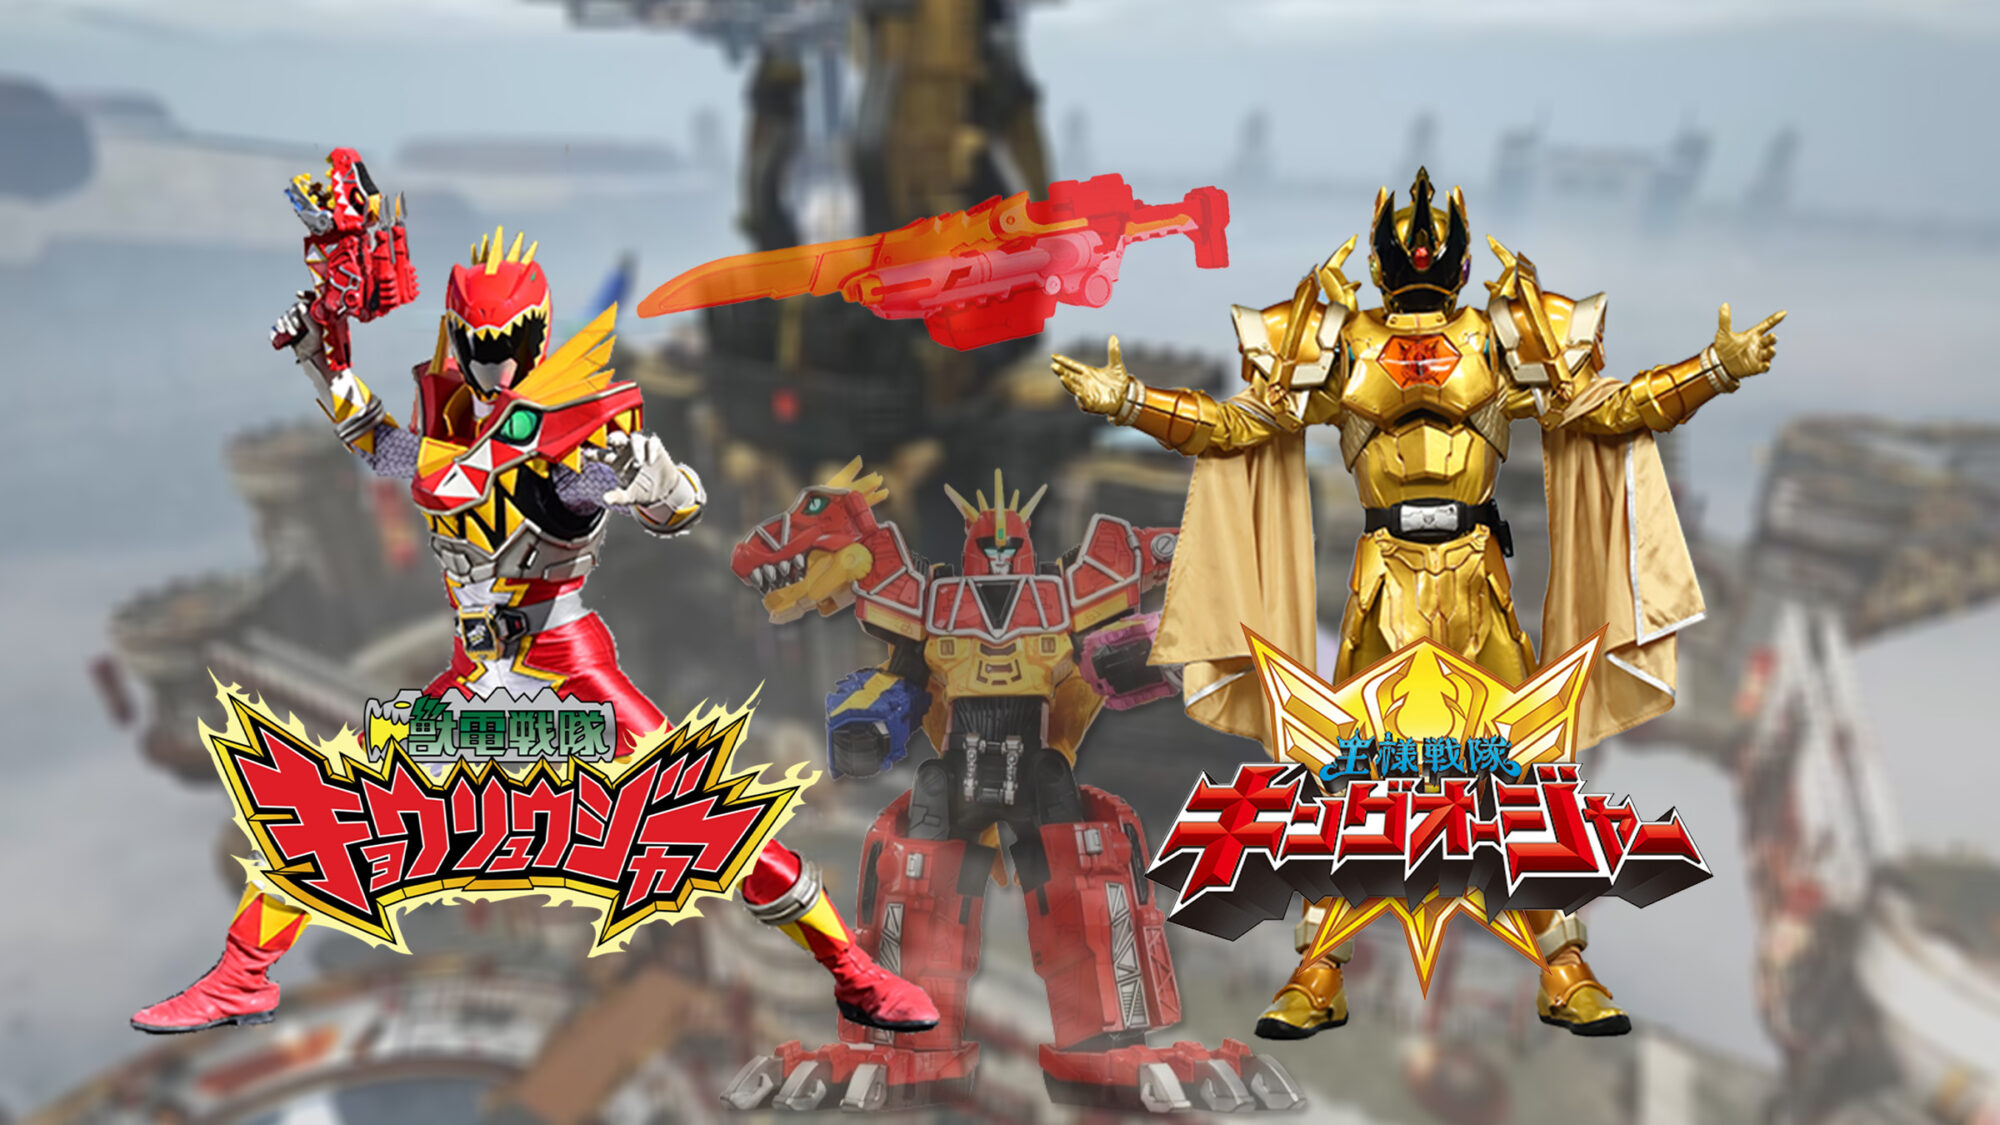 Kyoryuger 10th anniversary in KingOhger